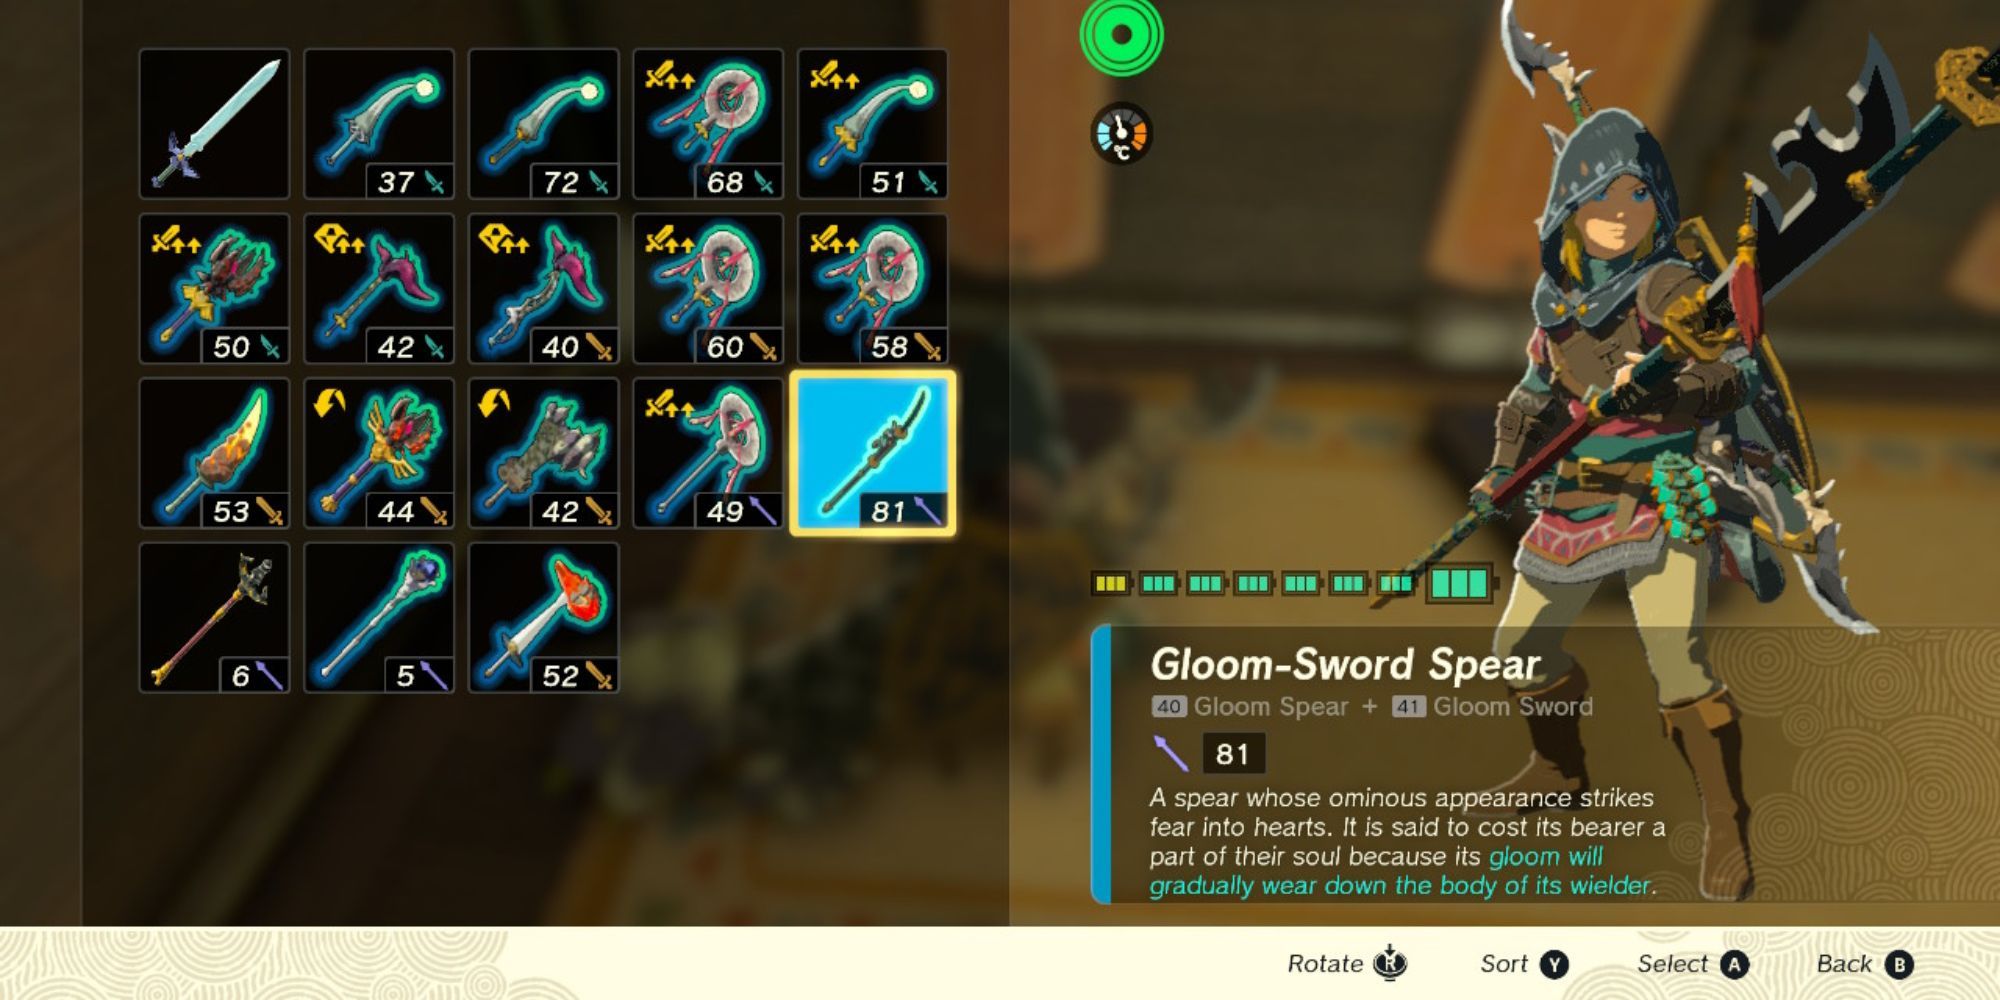 Link holding a Gloom-Sword Spear which has 81 overall damage